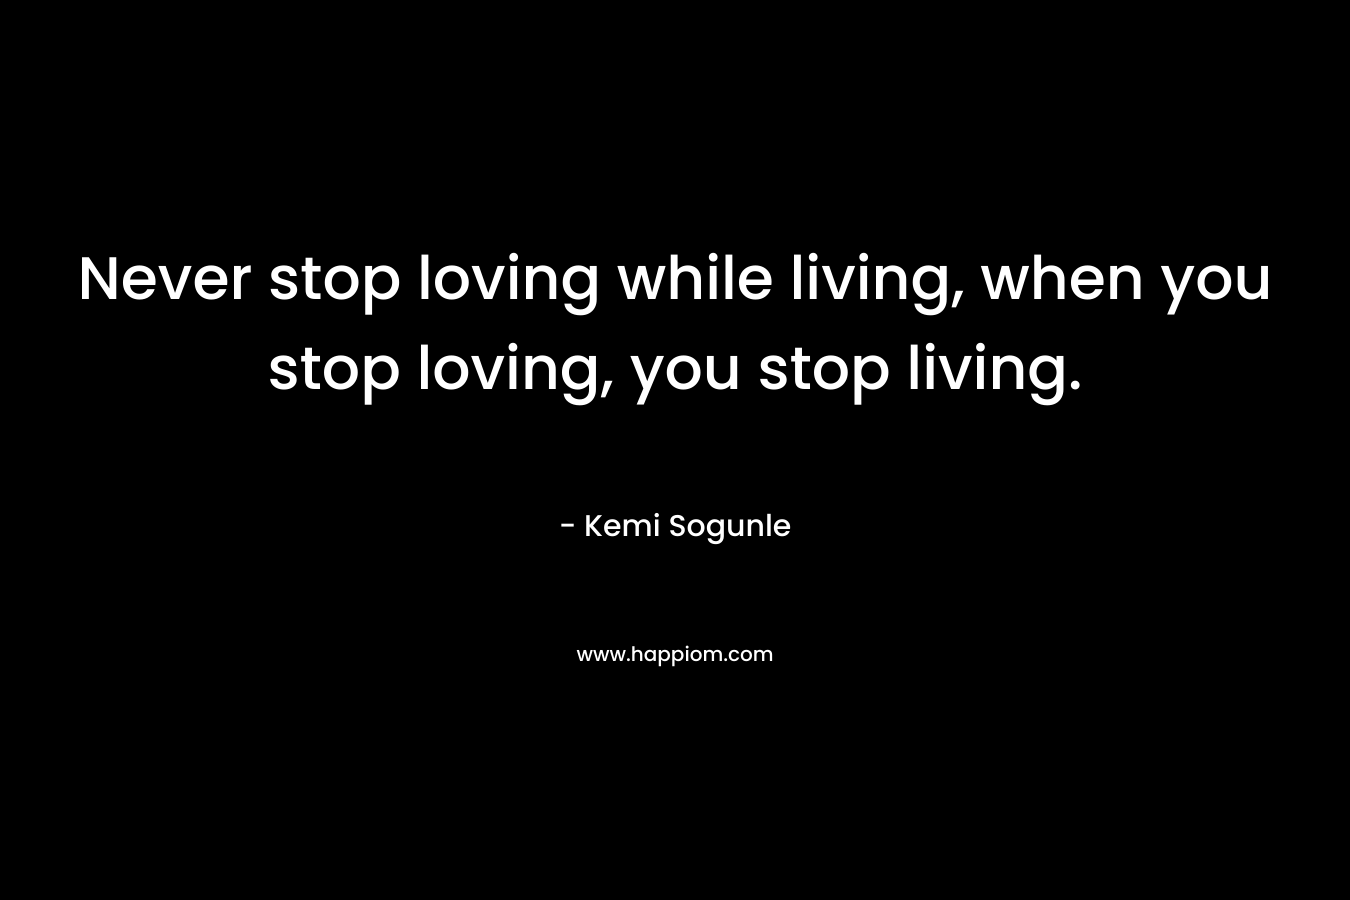 Never stop loving while living, when you stop loving, you stop living.